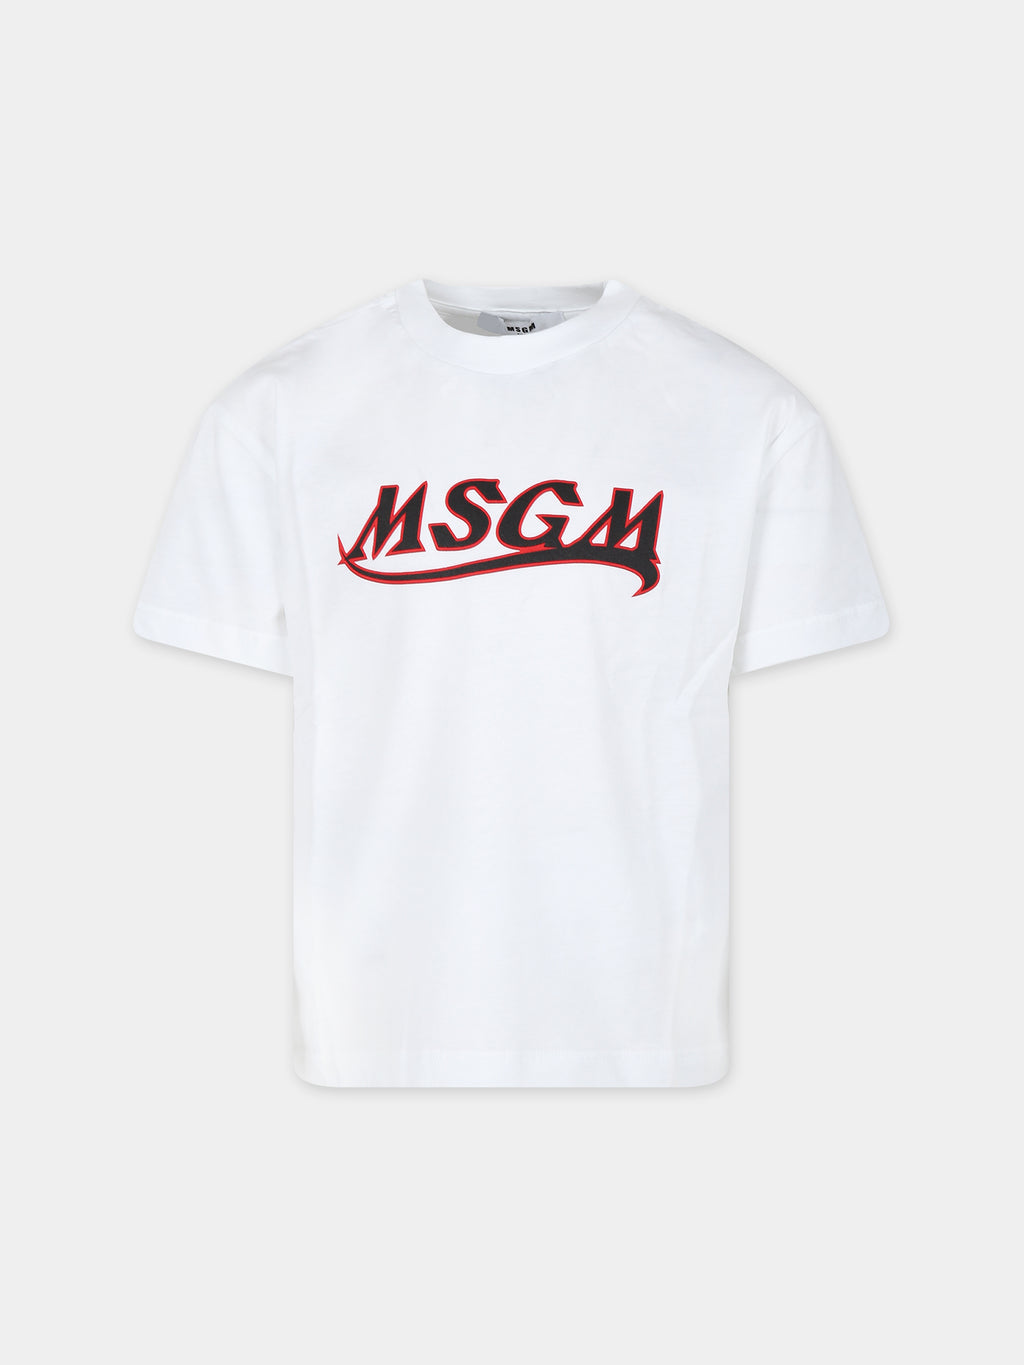 White t-shirt for kids with logo